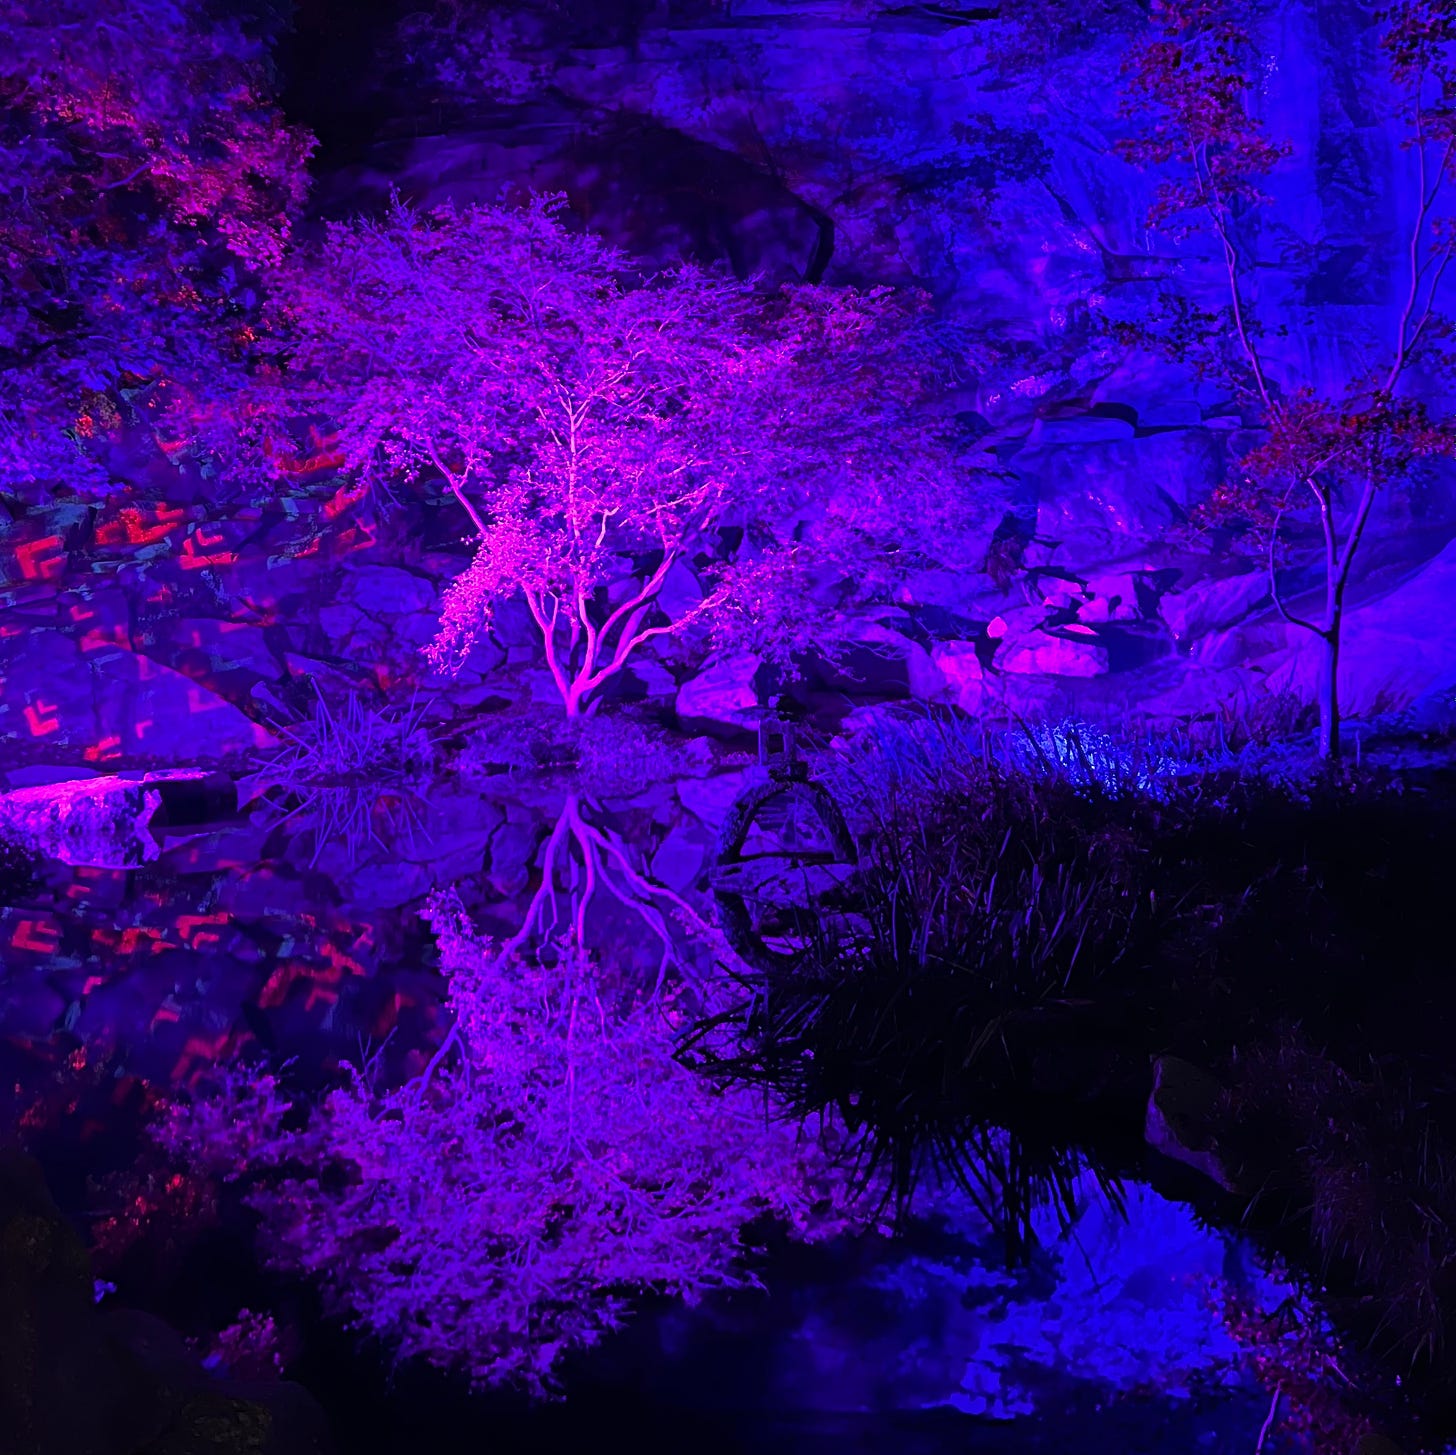 a small tree against a rock wall is reflected in the water below. the tree is lit up in purple, the rocks are dark blue, and the water is black.